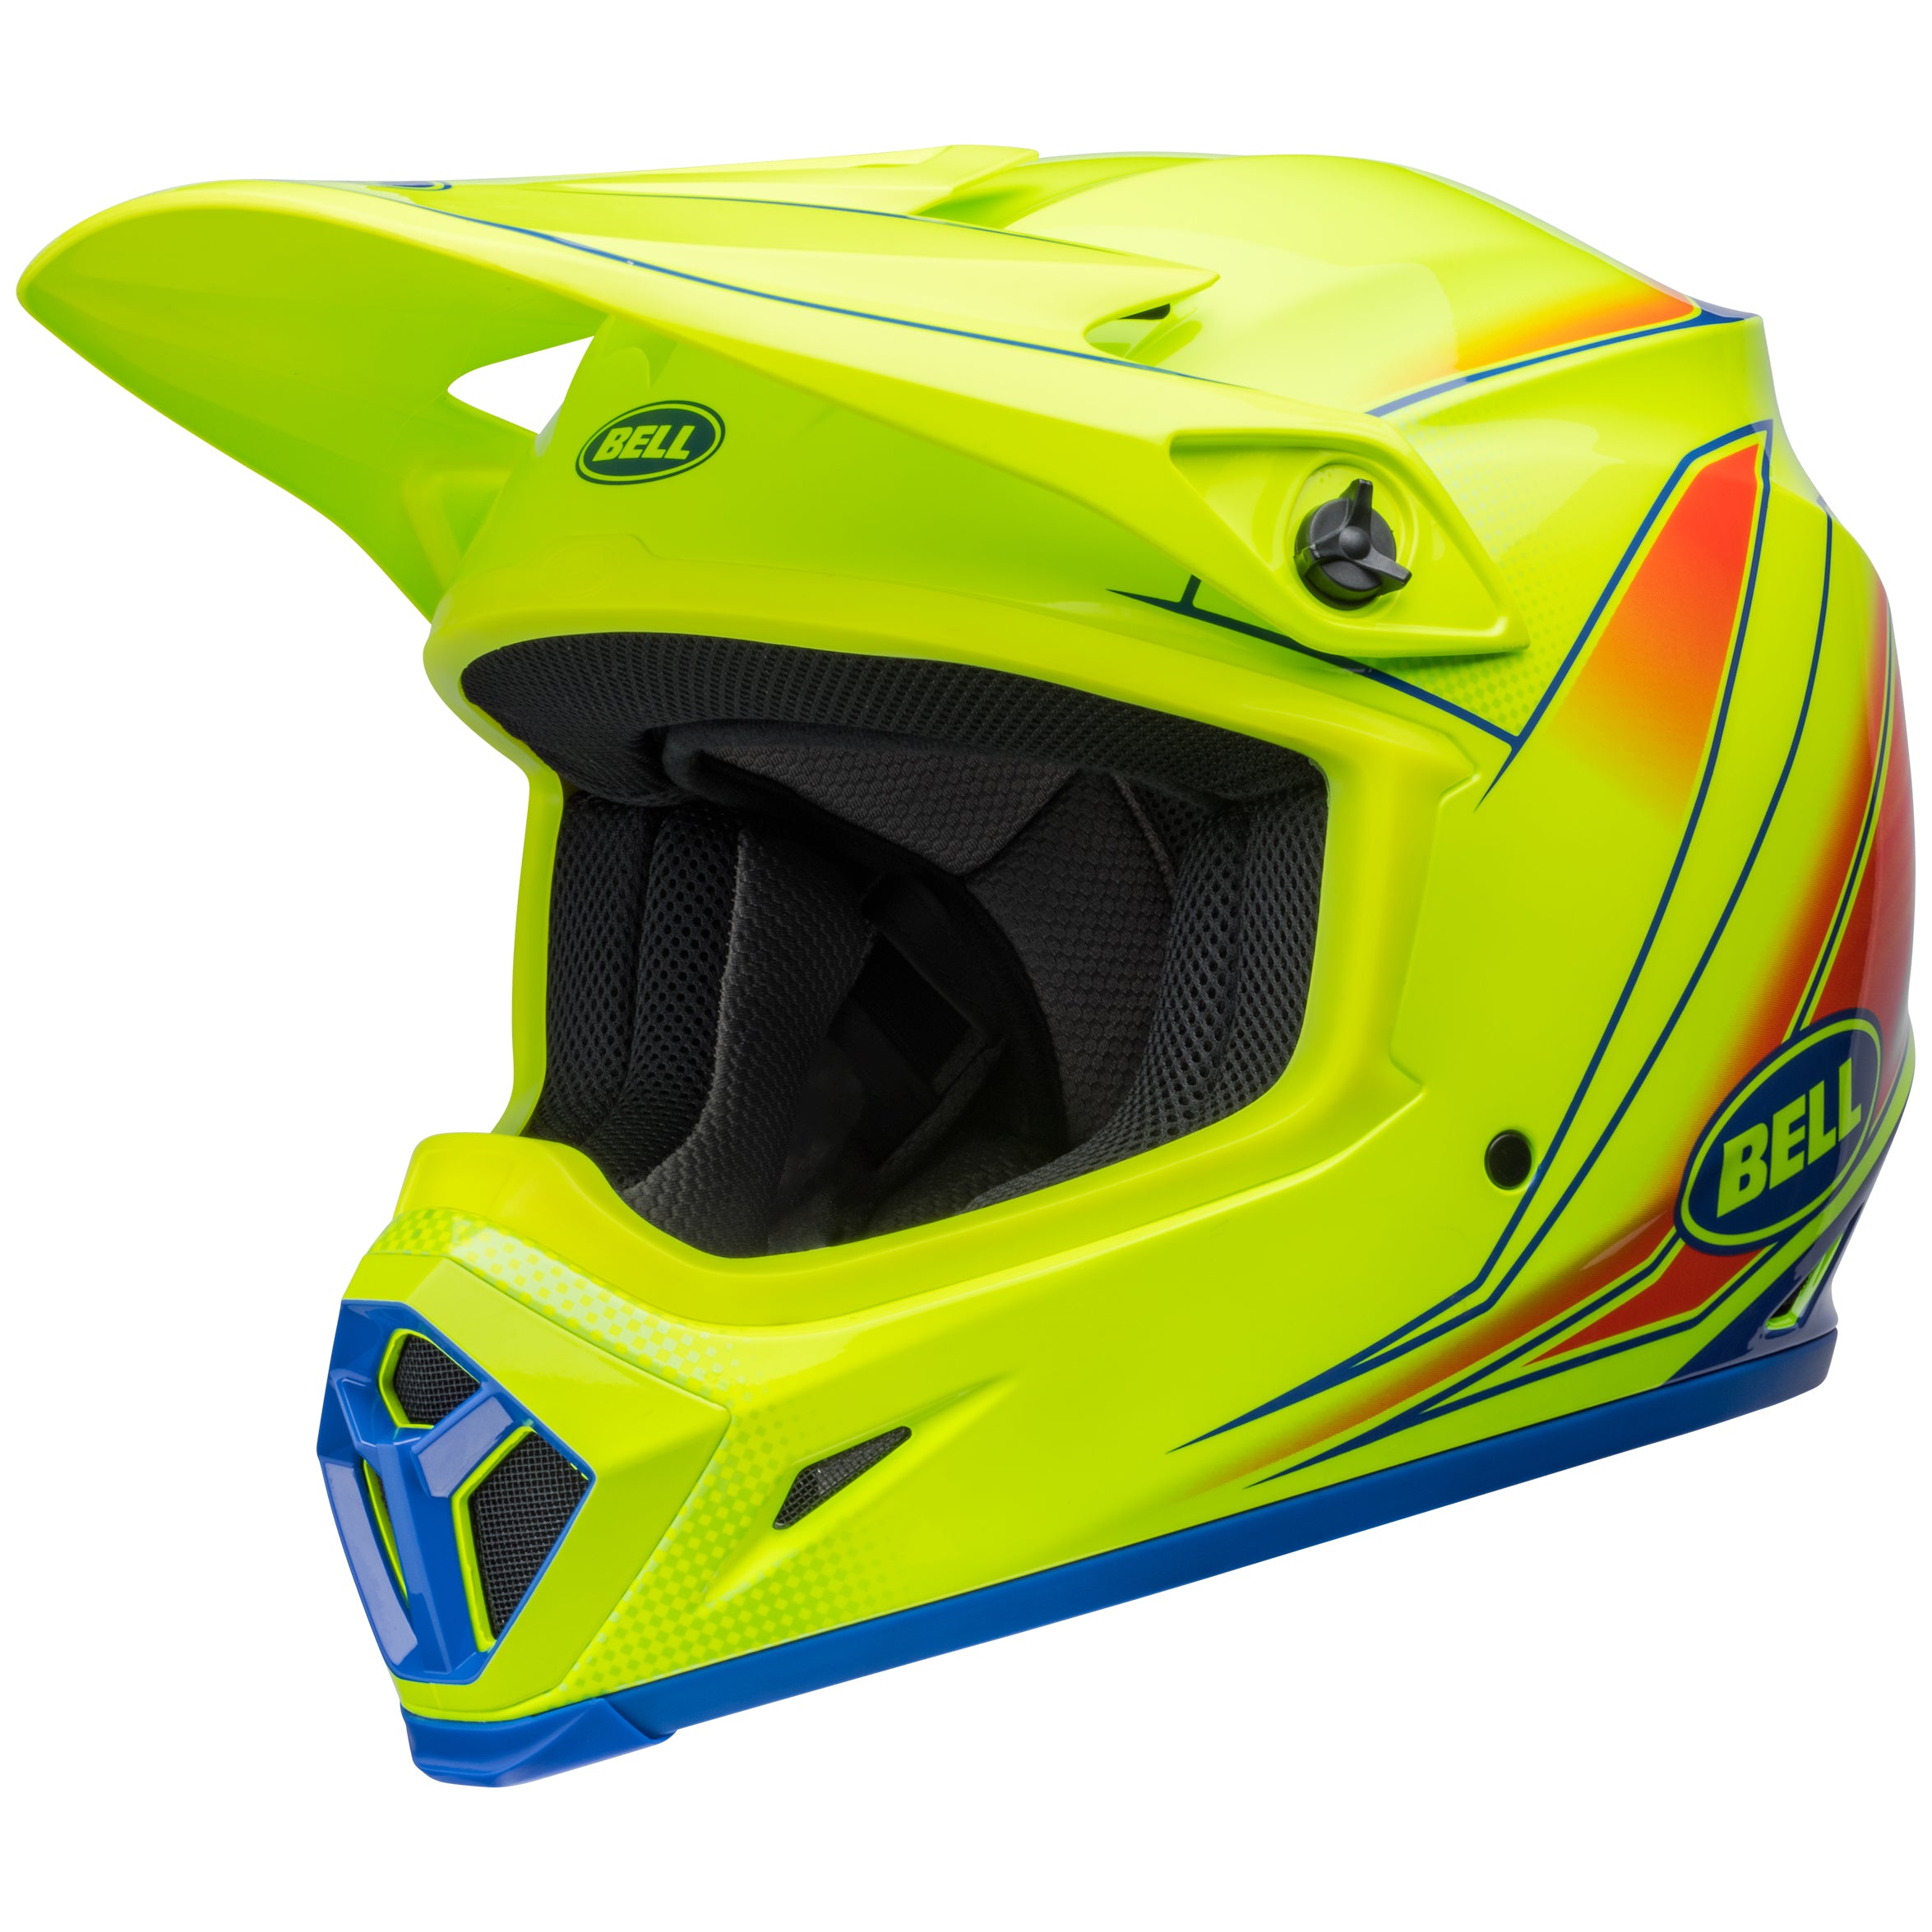 Bell MX 2024 MX-9 Mips Adult Helmet in Zone Retina design, featuring advanced safety technology and ECE6 certification